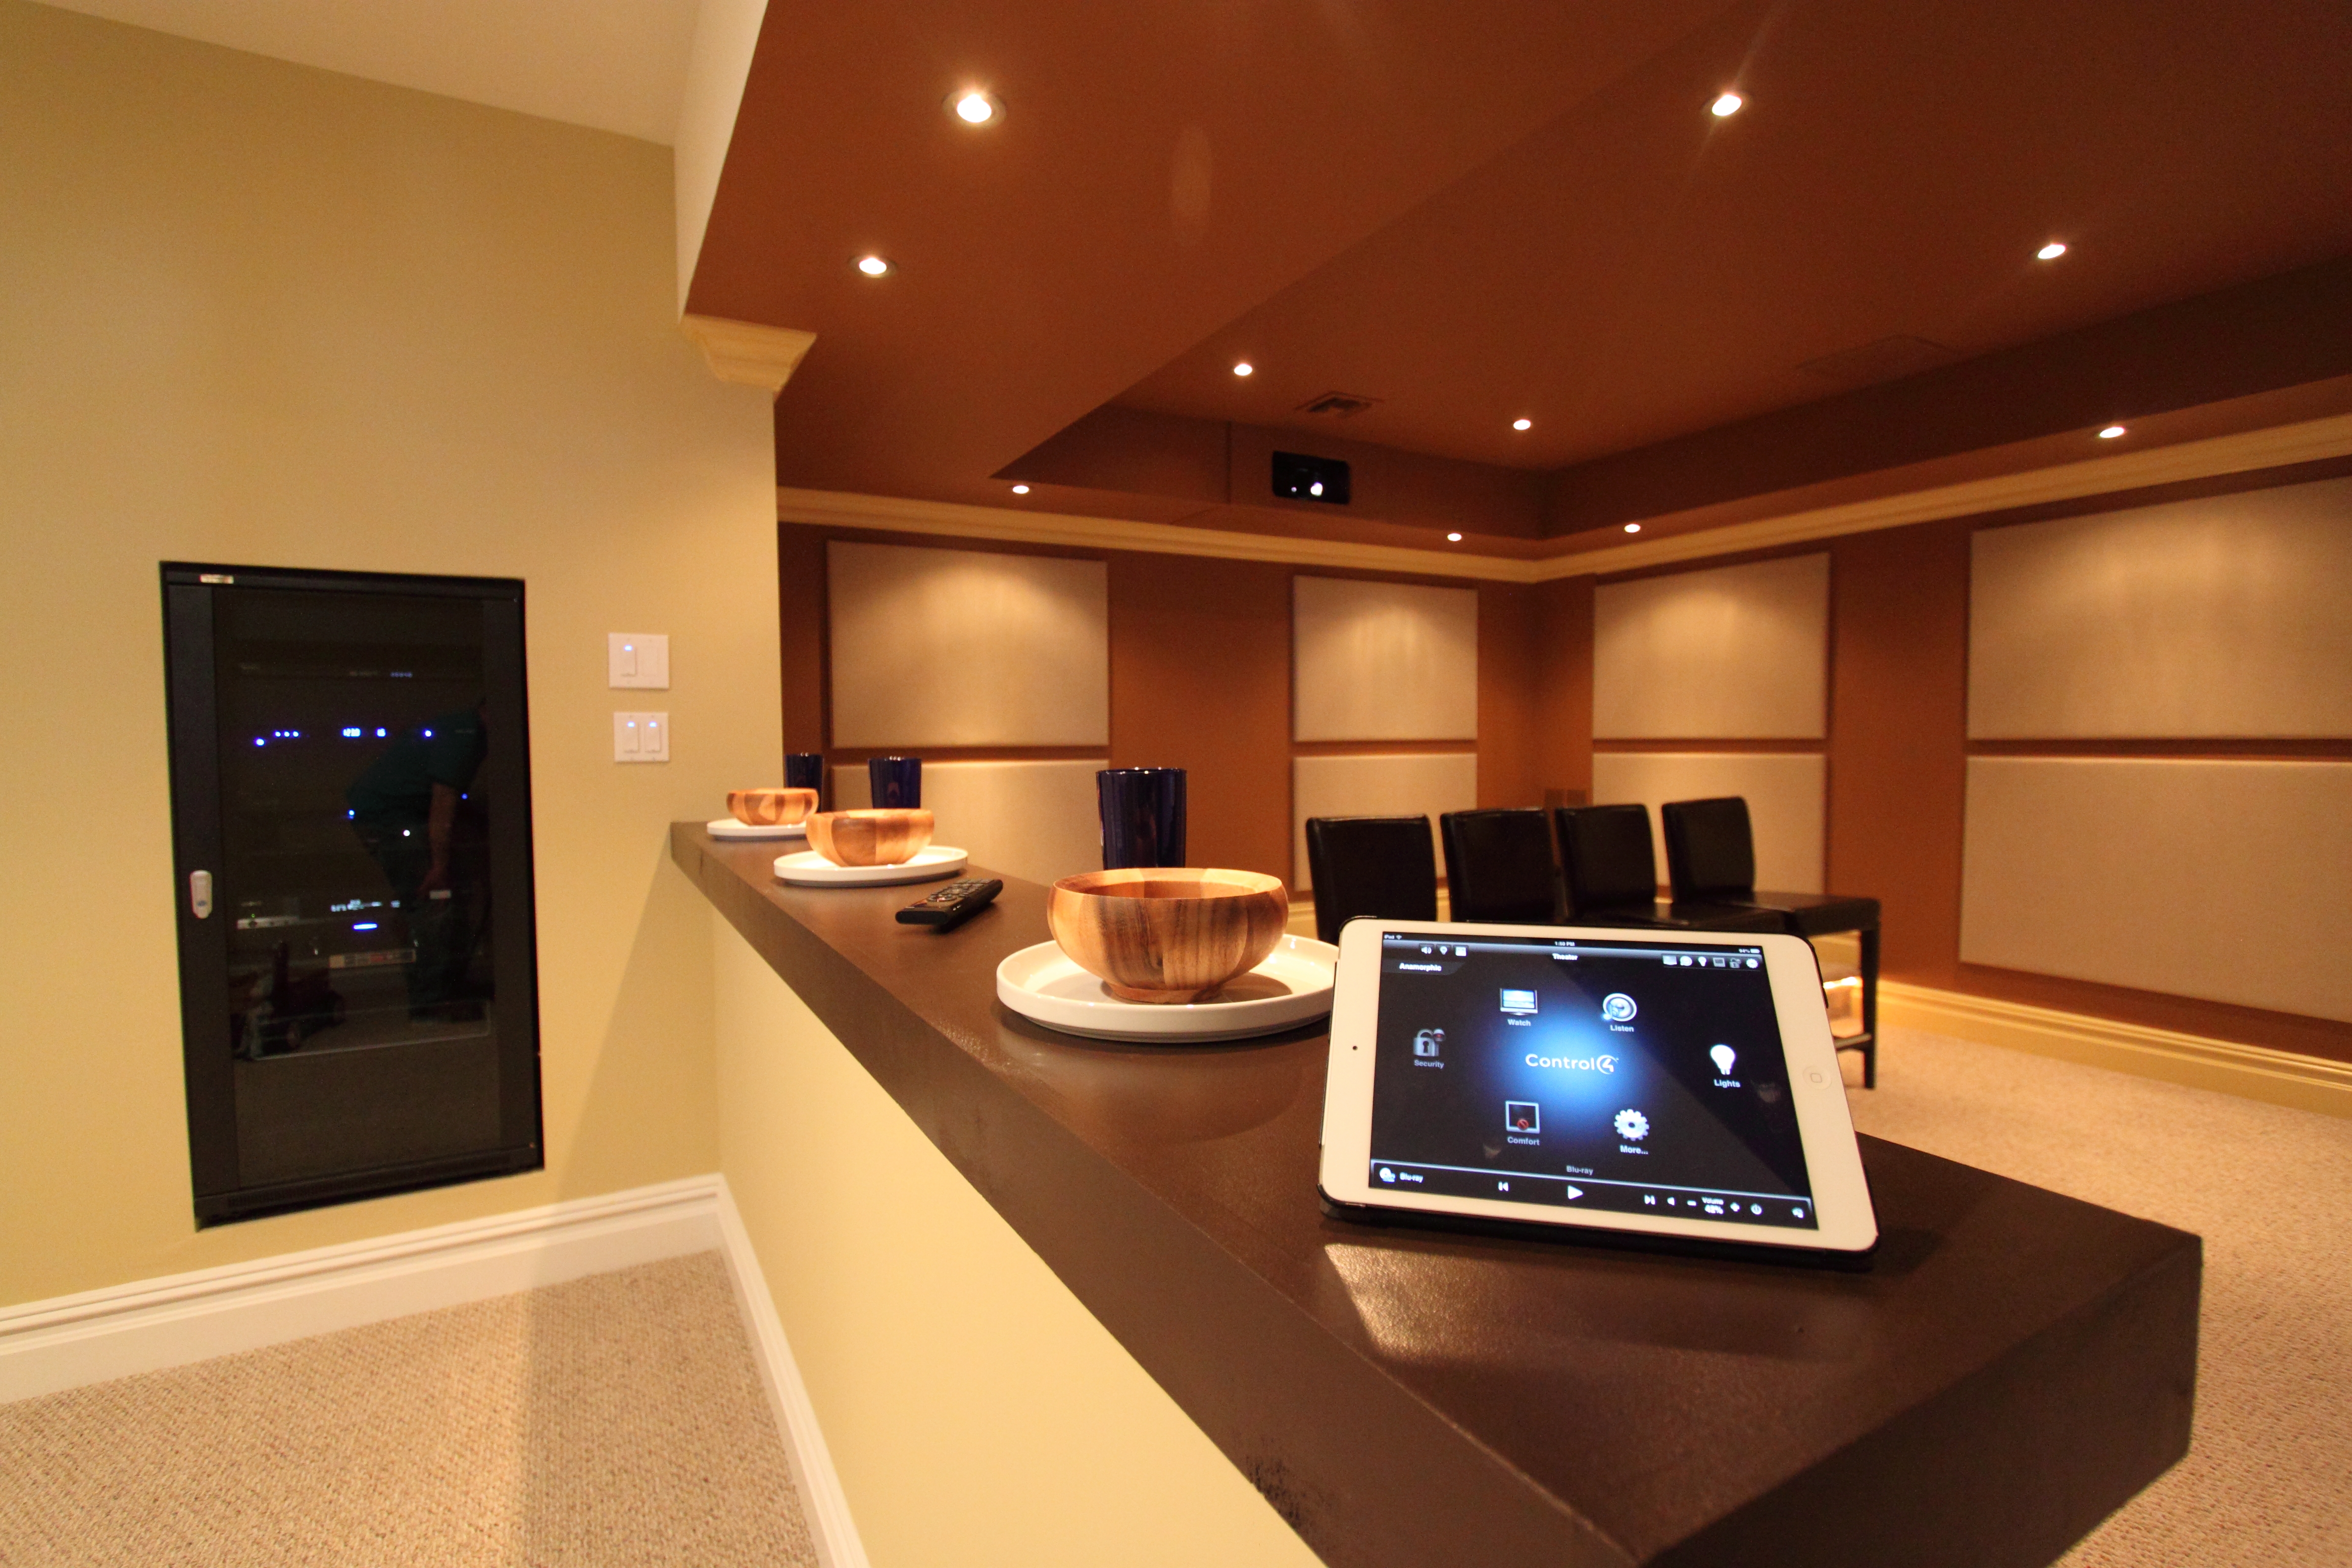 Lighting—An Important Component to a Home Theater Experience | Home